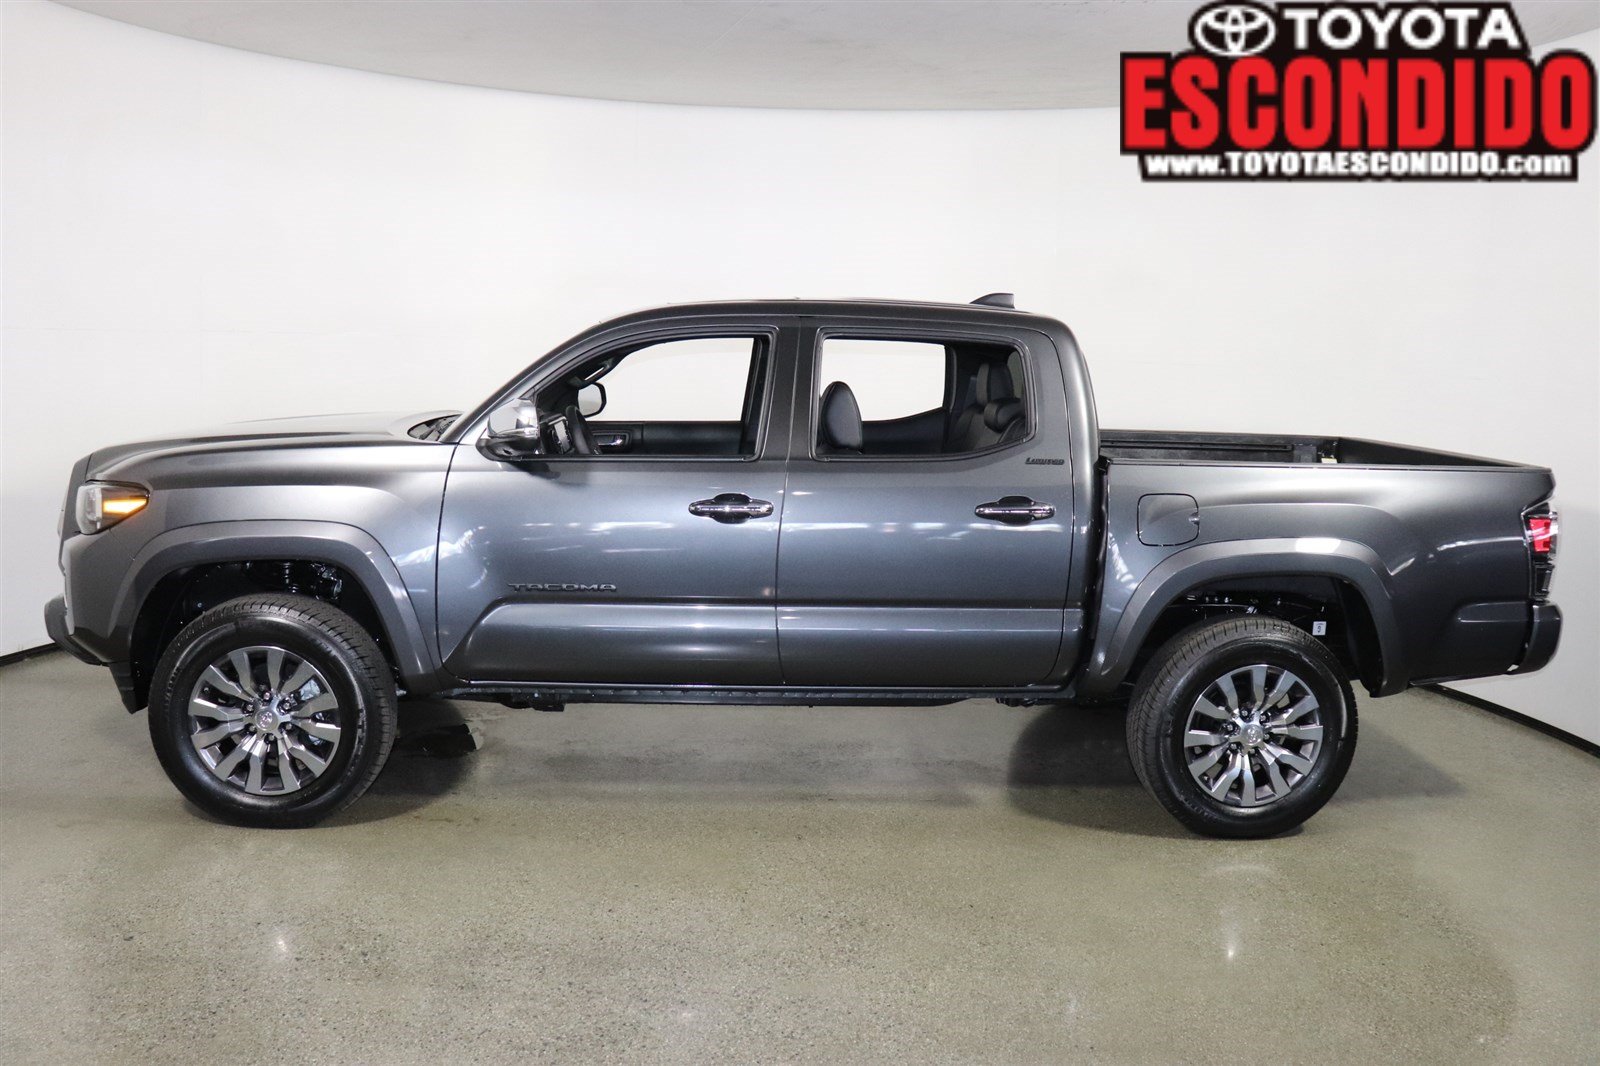 New 2020 Toyota Tacoma 4WD Limited Double Cab Pickup in Escondido